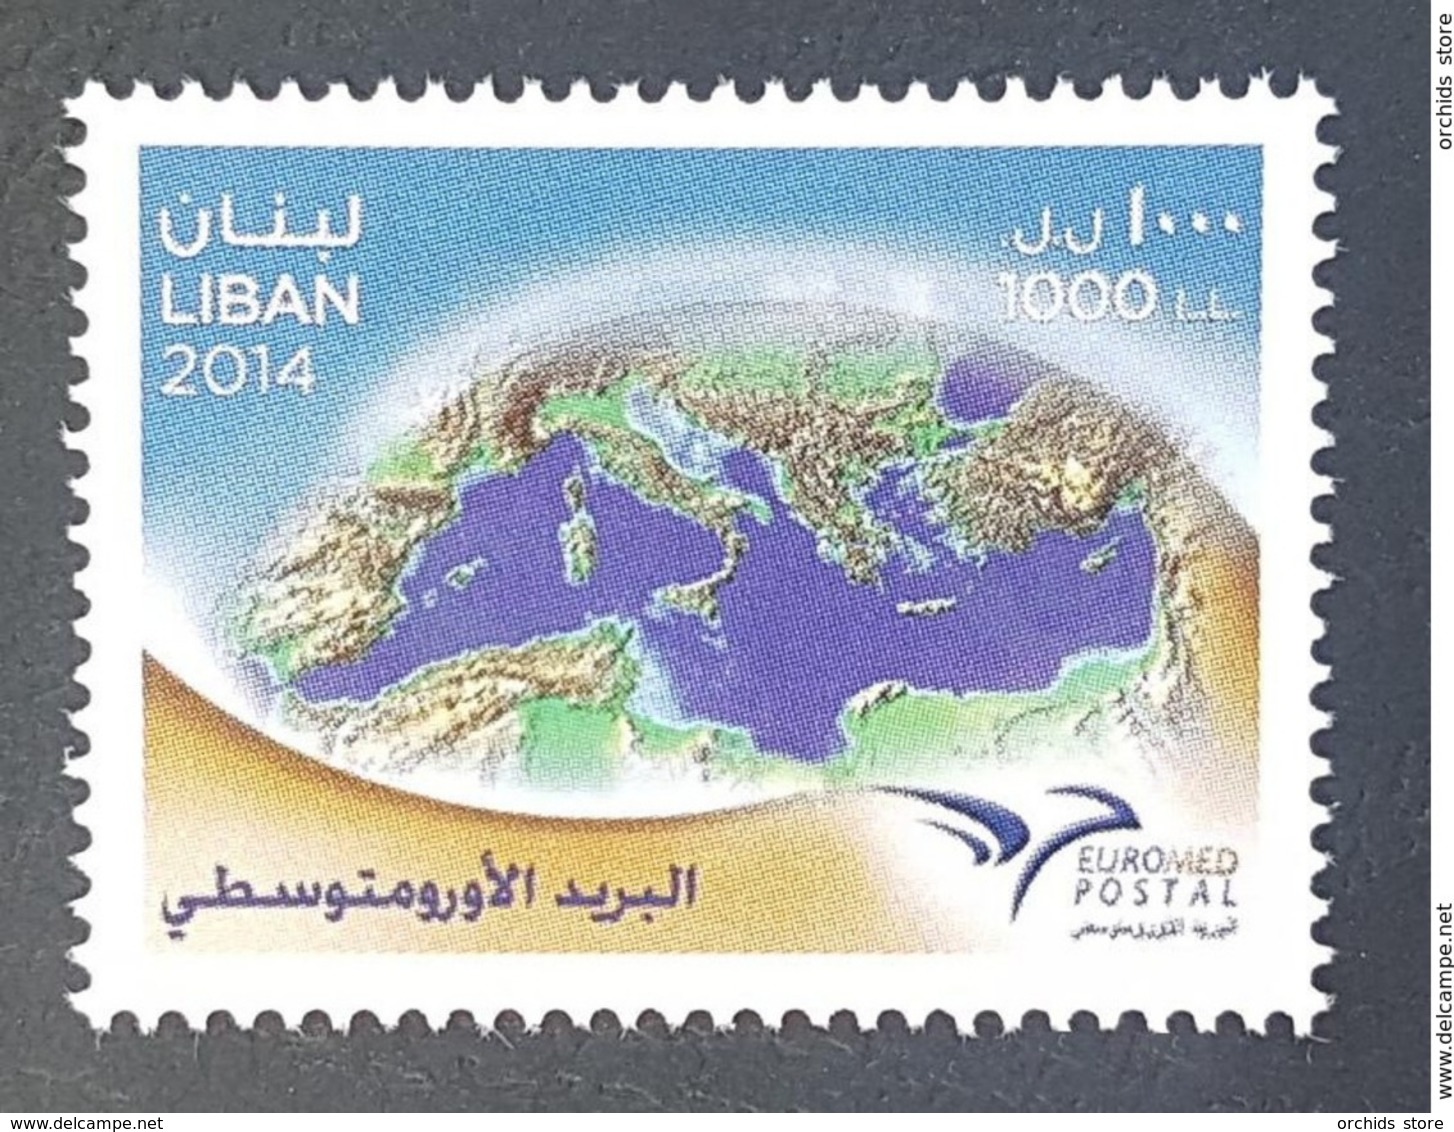 Lebanon 2014 NEW EUROMED POSTAL UPU Joined Issue Between 11 Mediterranean Countries - Very Ltd Quantity - Lebanon